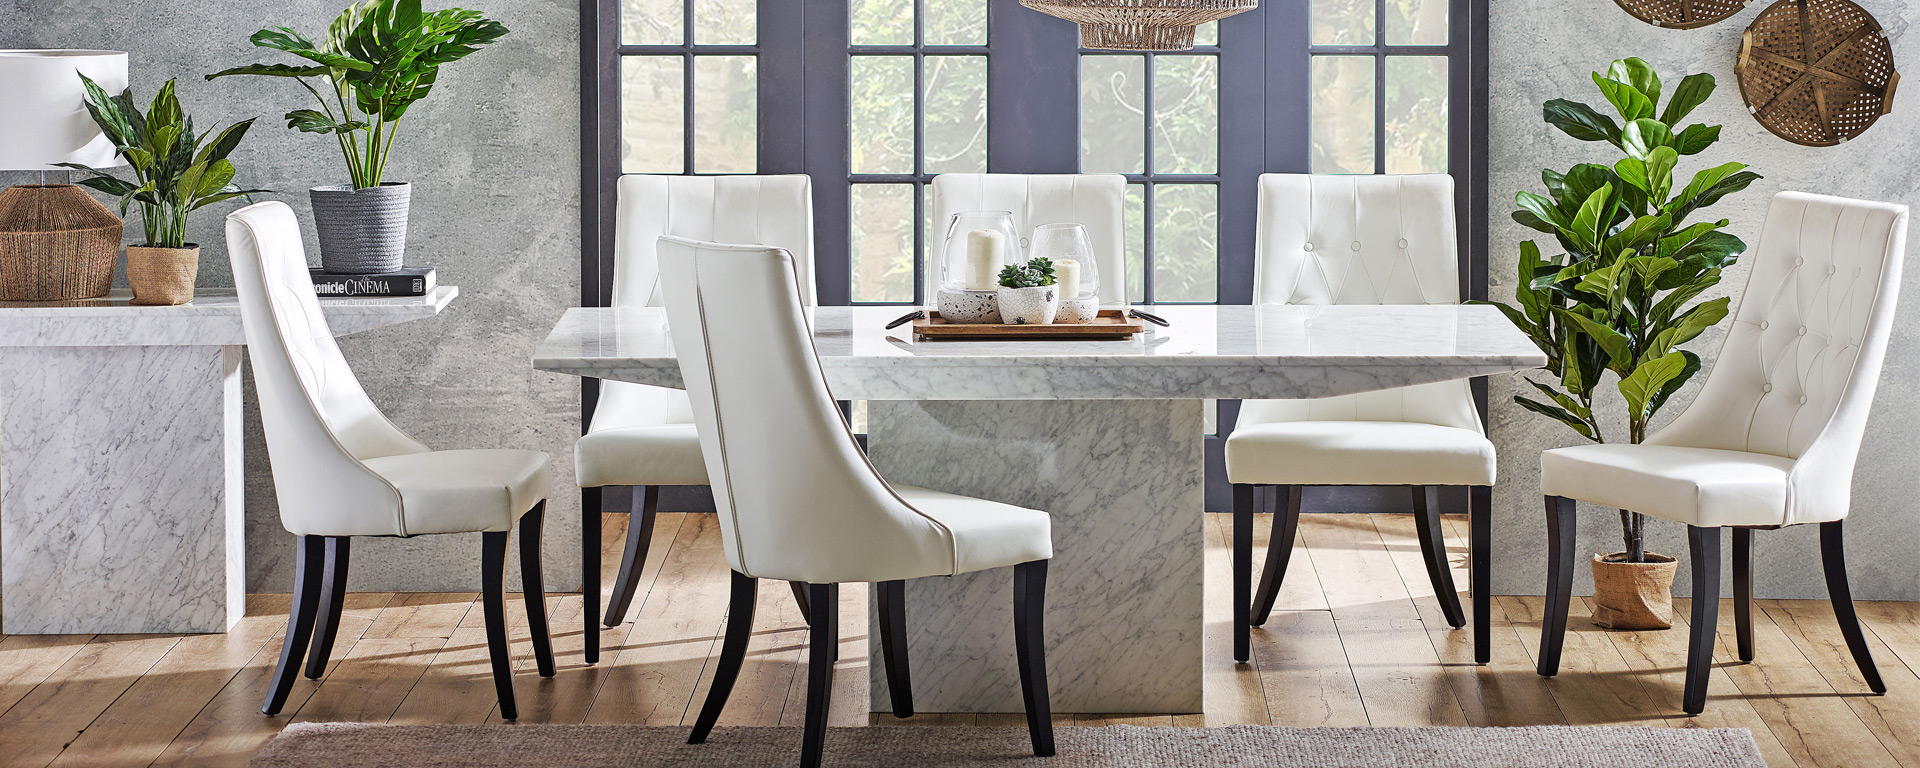 Dining Room Goals 5 Trending Concrete And Stone Dining throughout dimensions 1920 X 768